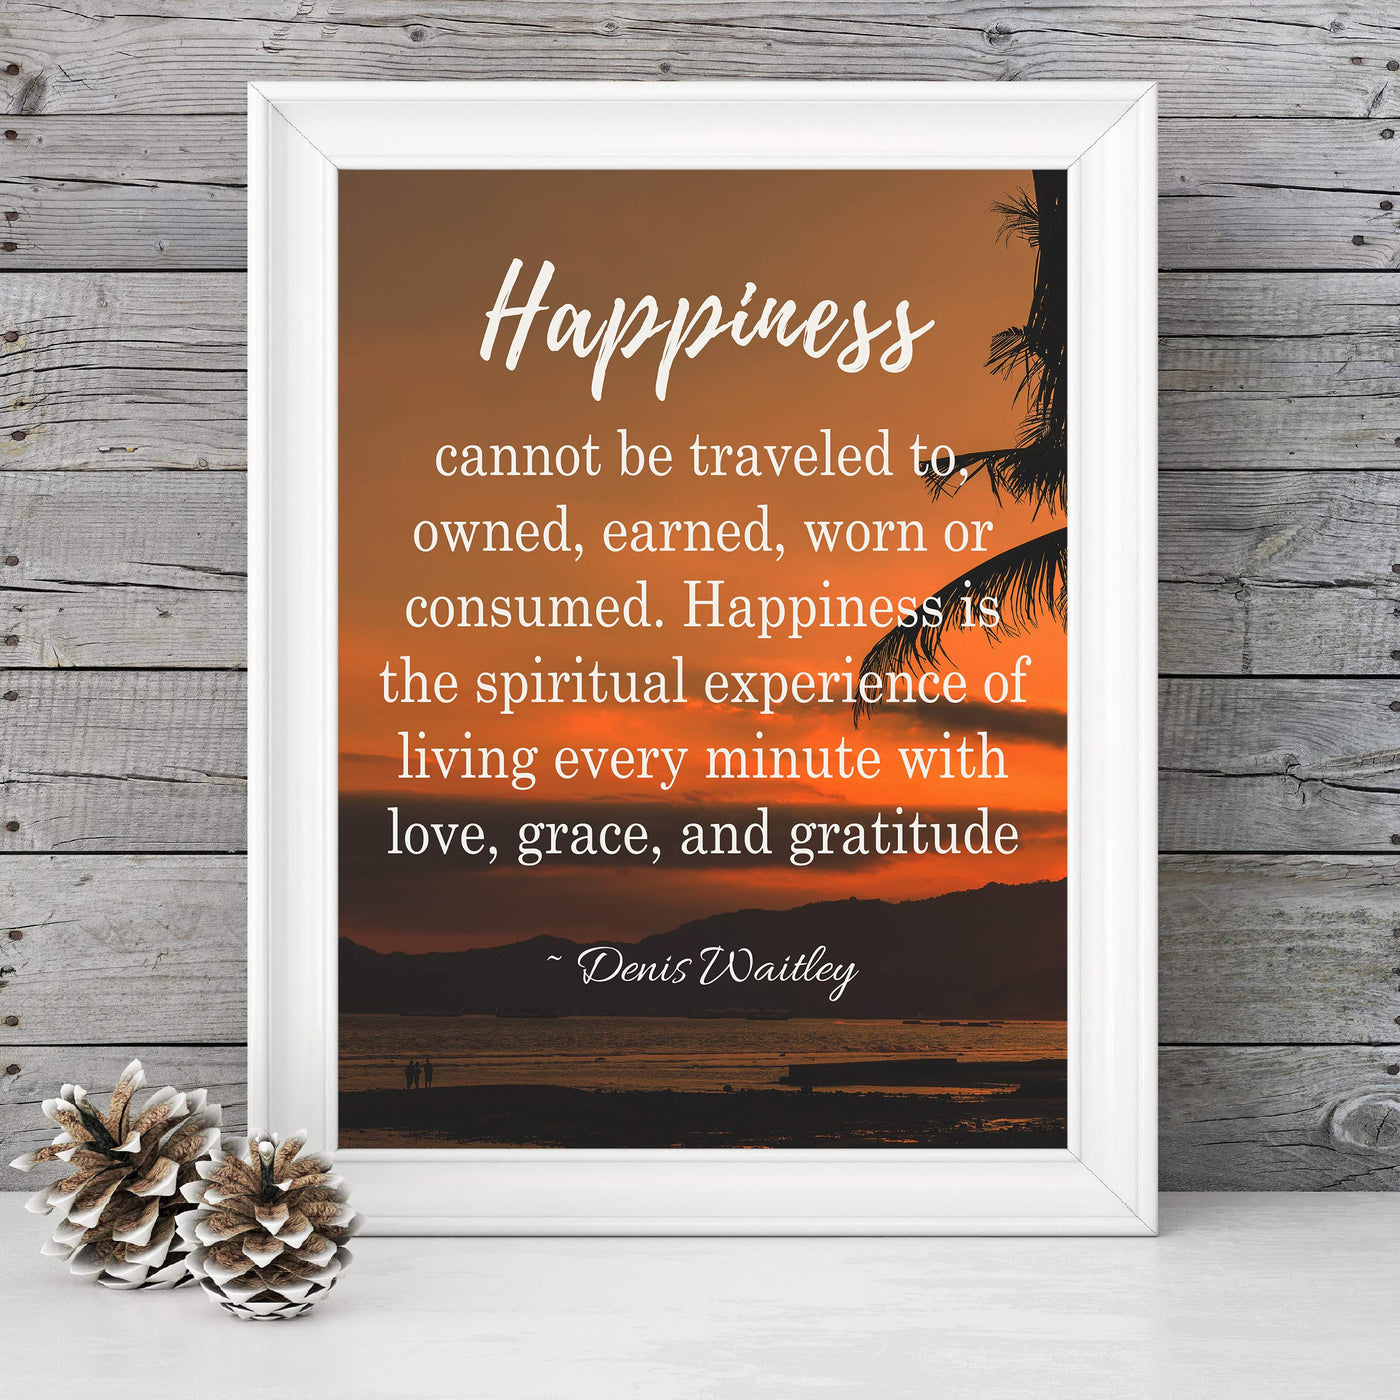 Happiness is Living With Love, Grace & Gratitude- Inspirational Wall Art-8 x 10" Print Wall Print-Ready to Frame. Modern Spiritual Typographic Decor for Home-Office-Studio. Dennis Waitley Quotes.